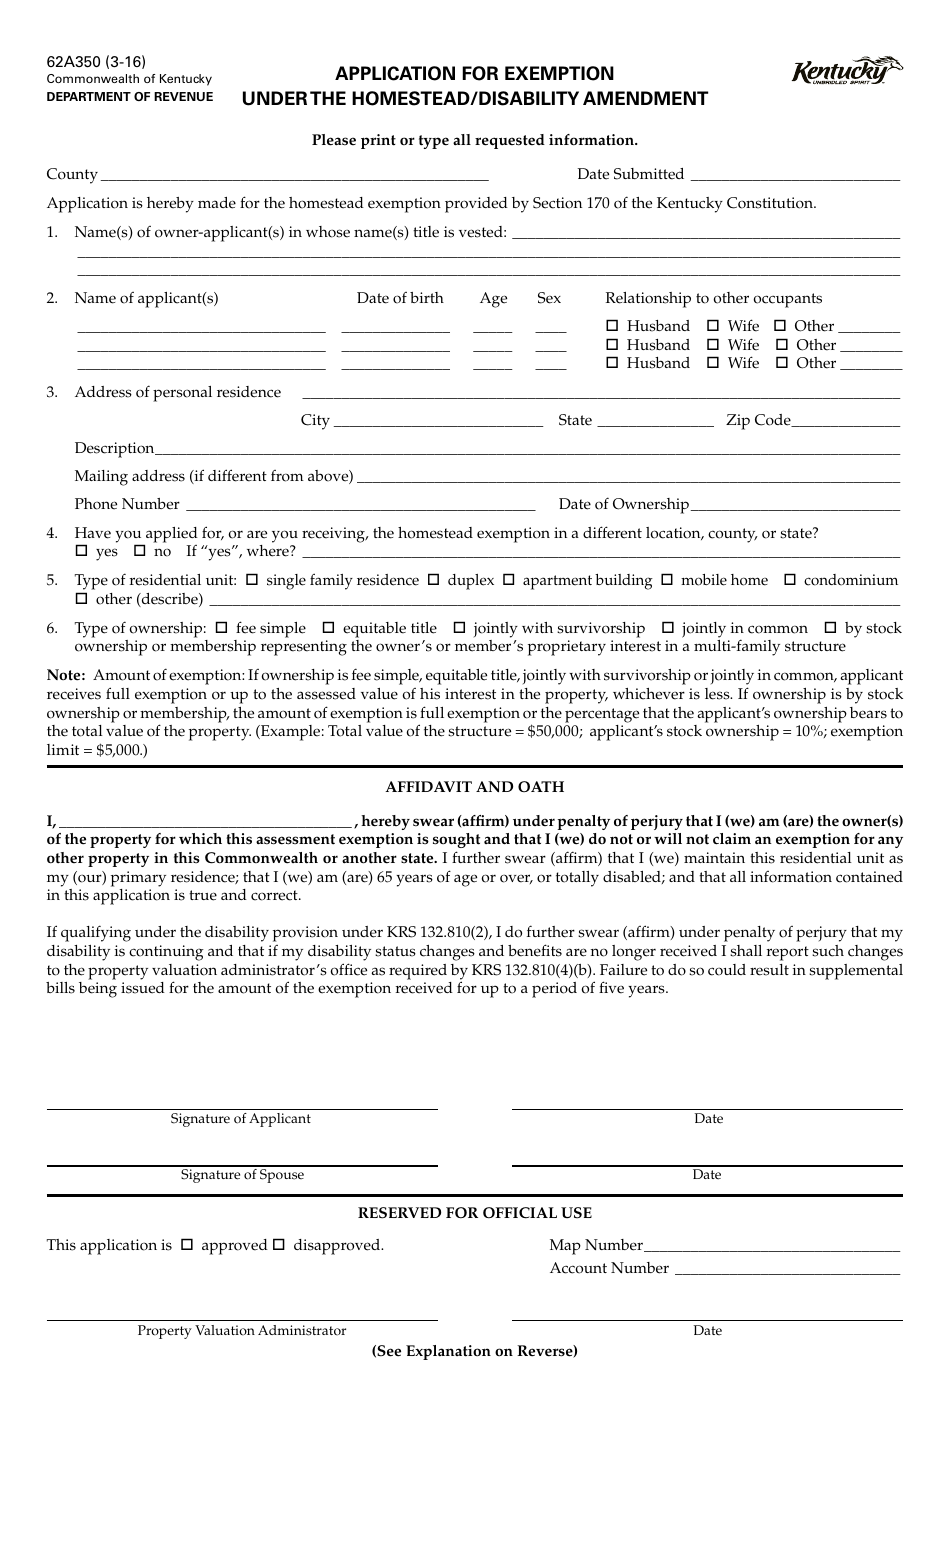 Form 62A350 Application for Exemption Under the Homestead / Disability Amendment - Kentucky, Page 1